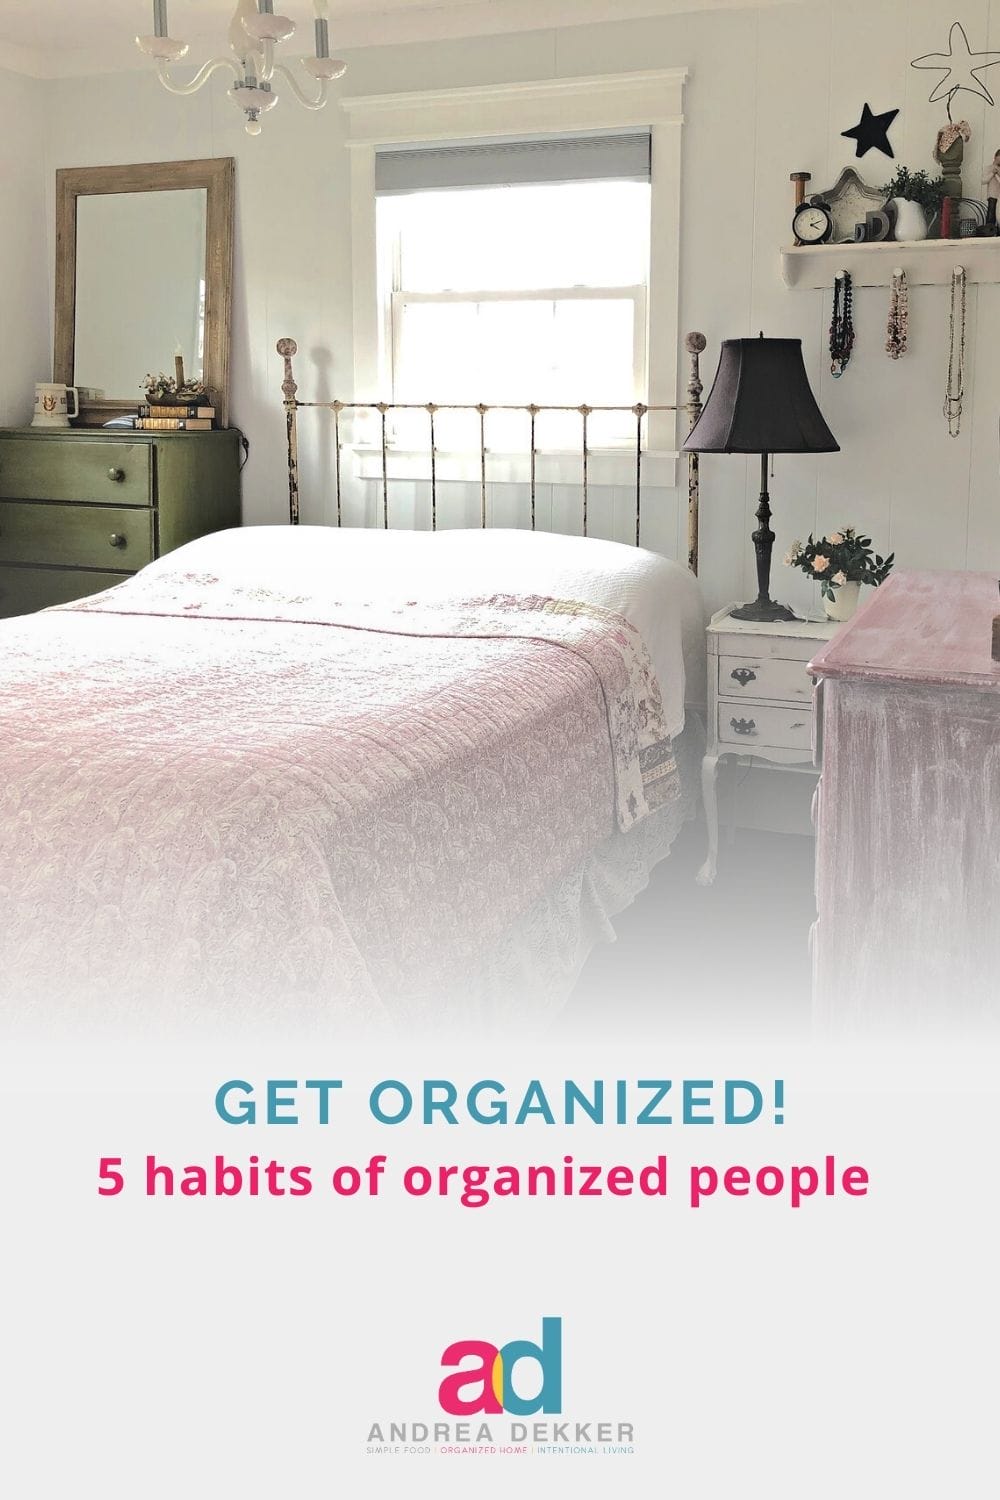 If you don't love cleaning and organizing but still want a neat and organized home, these 5 habits of organized people will give you a place to start! via @andreadekker